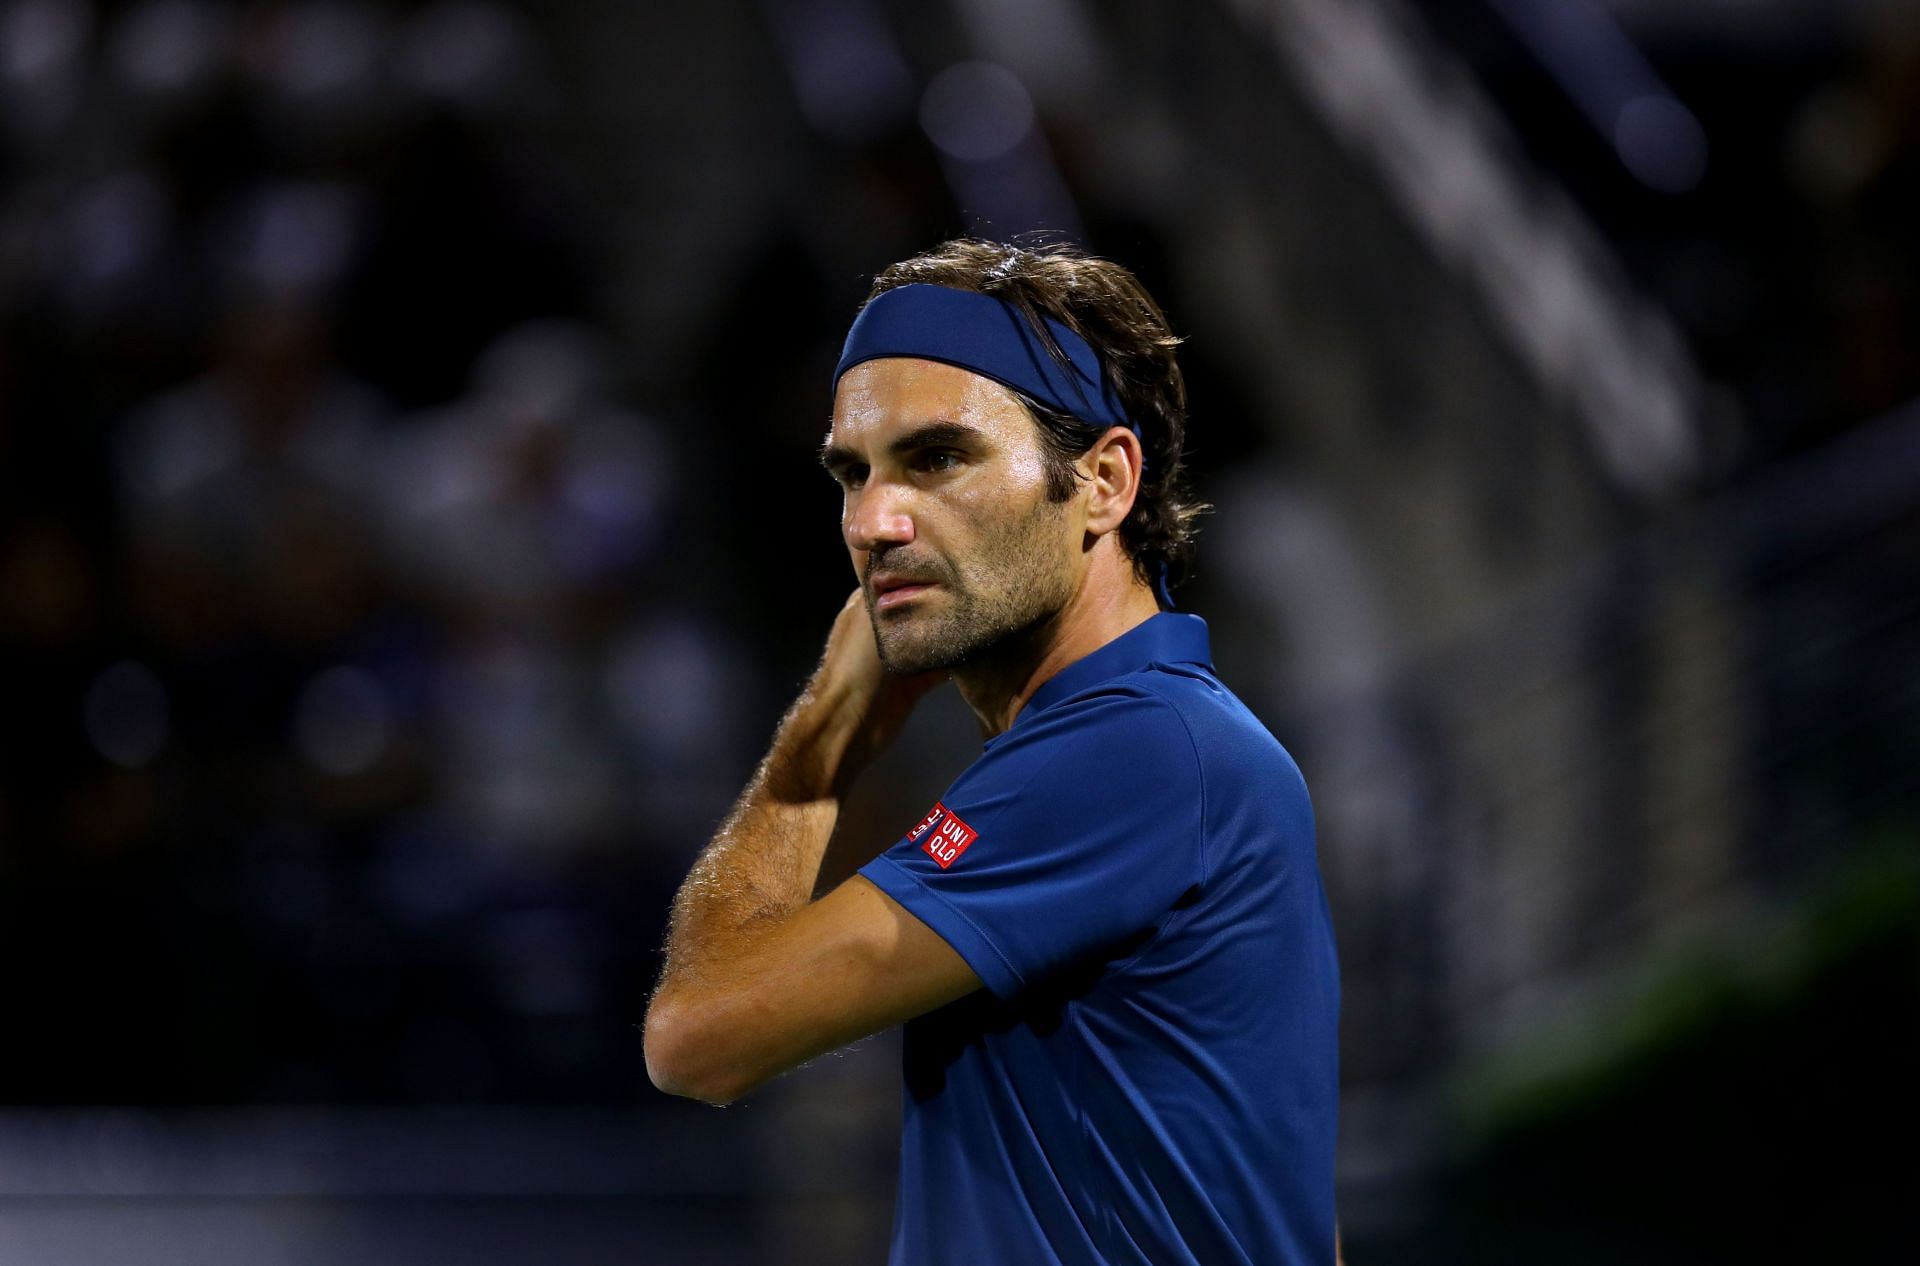 Roger Federer has won the Dubai Tennis Championship a record eight times, most recently in 2019